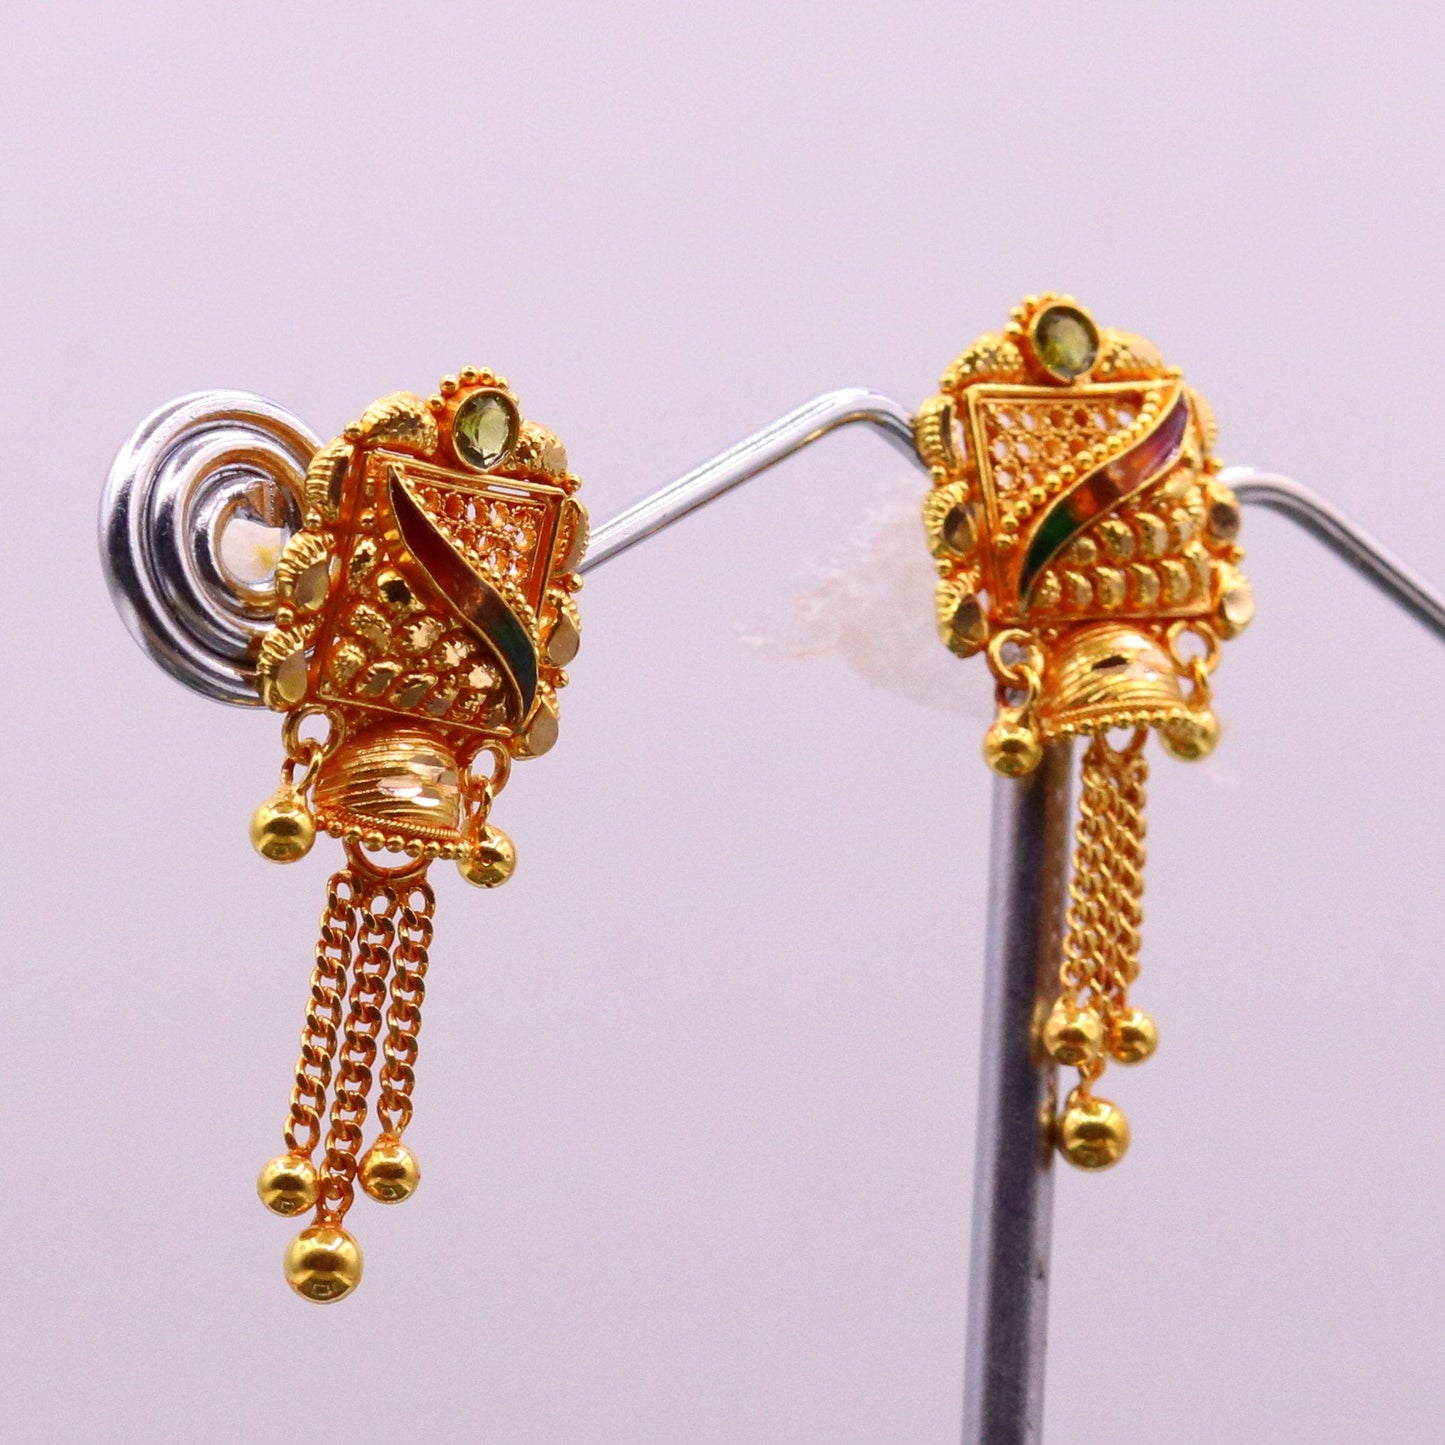 22kt yellow gold handmade filigree work antique style earrings pair drop dangle gorgeous wome's jewelry er92 - TRIBAL ORNAMENTS